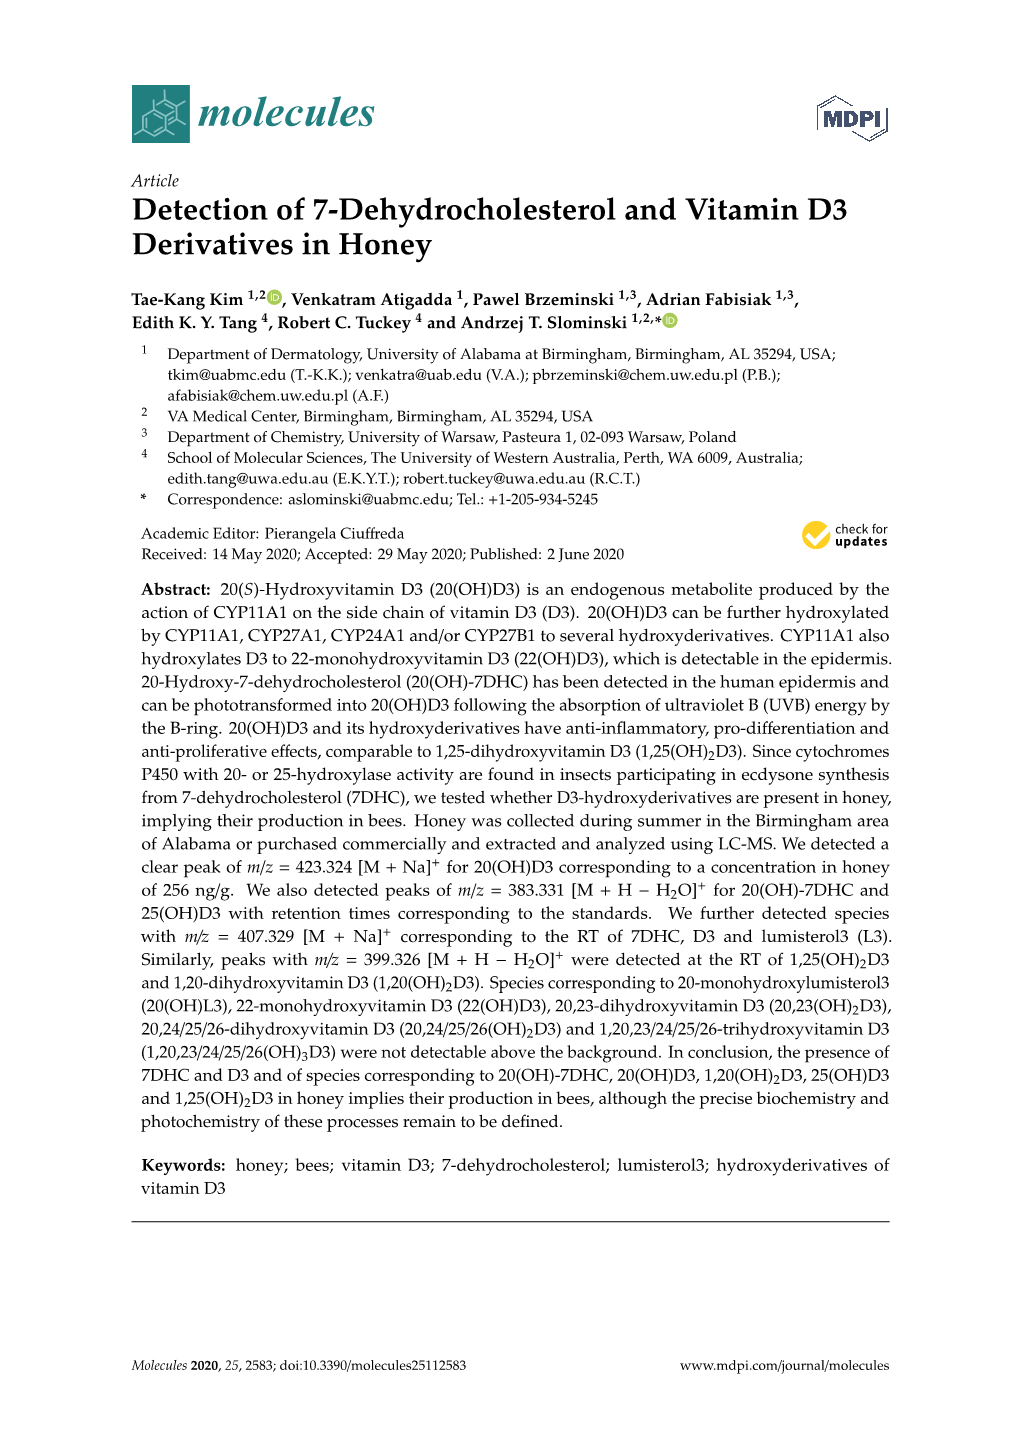 Detection of 7-Dehydrocholesterol and Vitamin D3 Derivatives in Honey